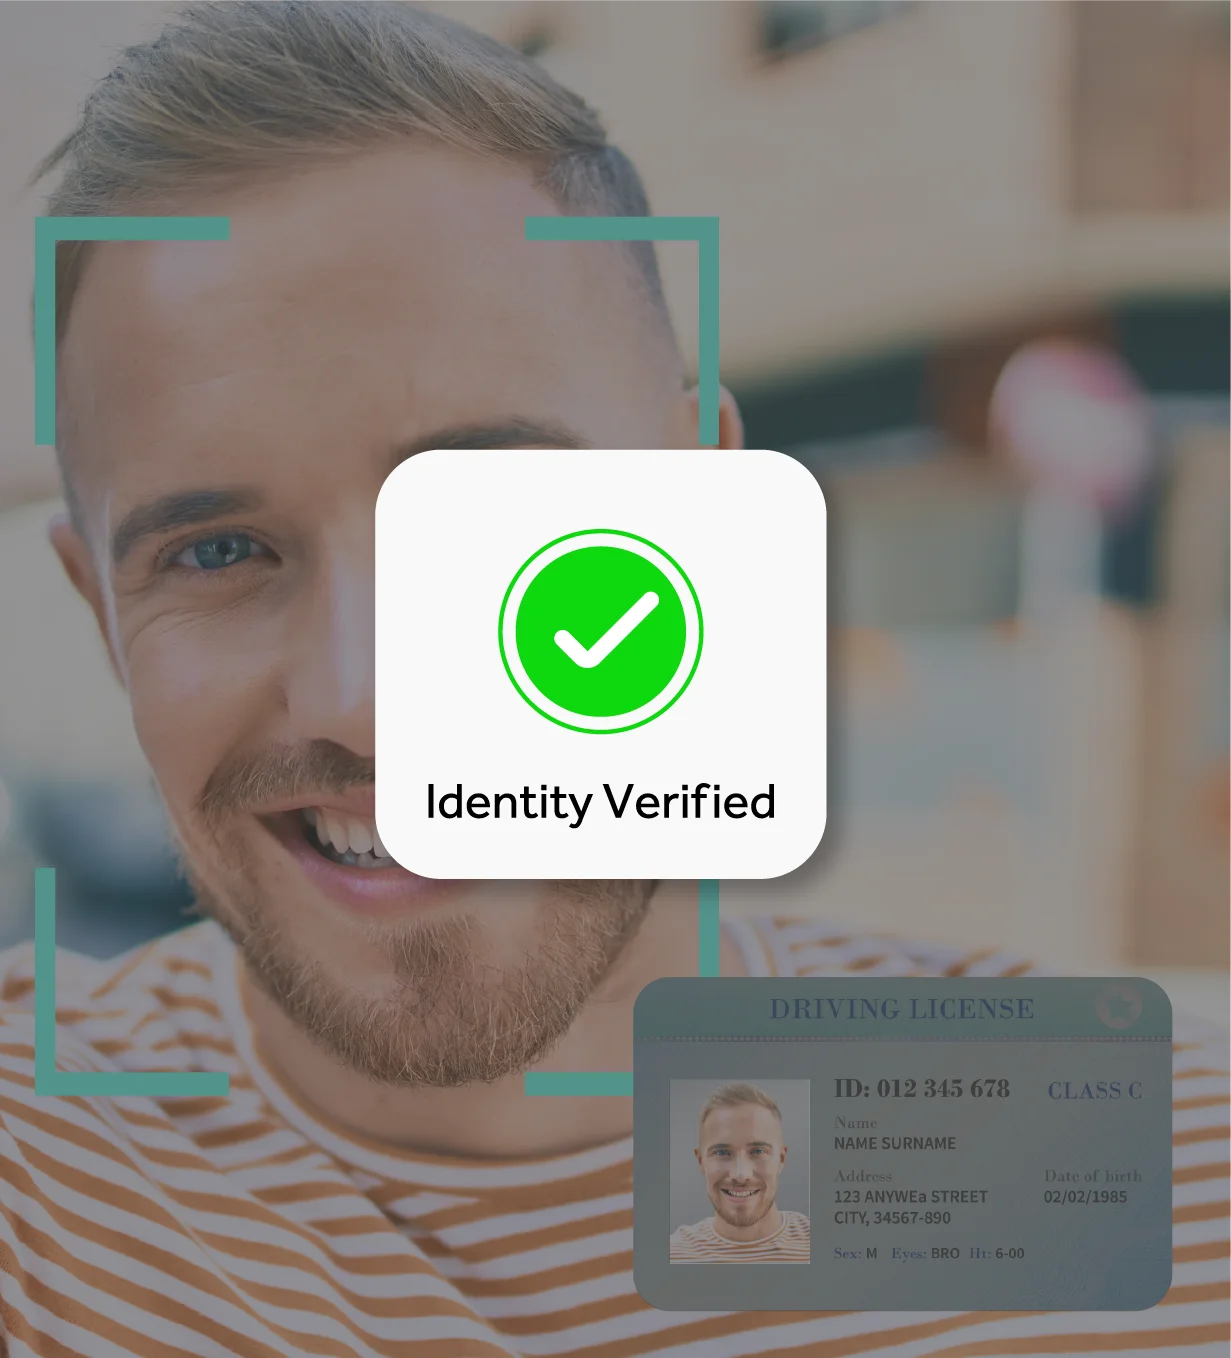 In the final stage, the system confirms the individual's identity when the likeness between the live selfie and the ID photo meets predetermined criteria, allowing access or authorization.